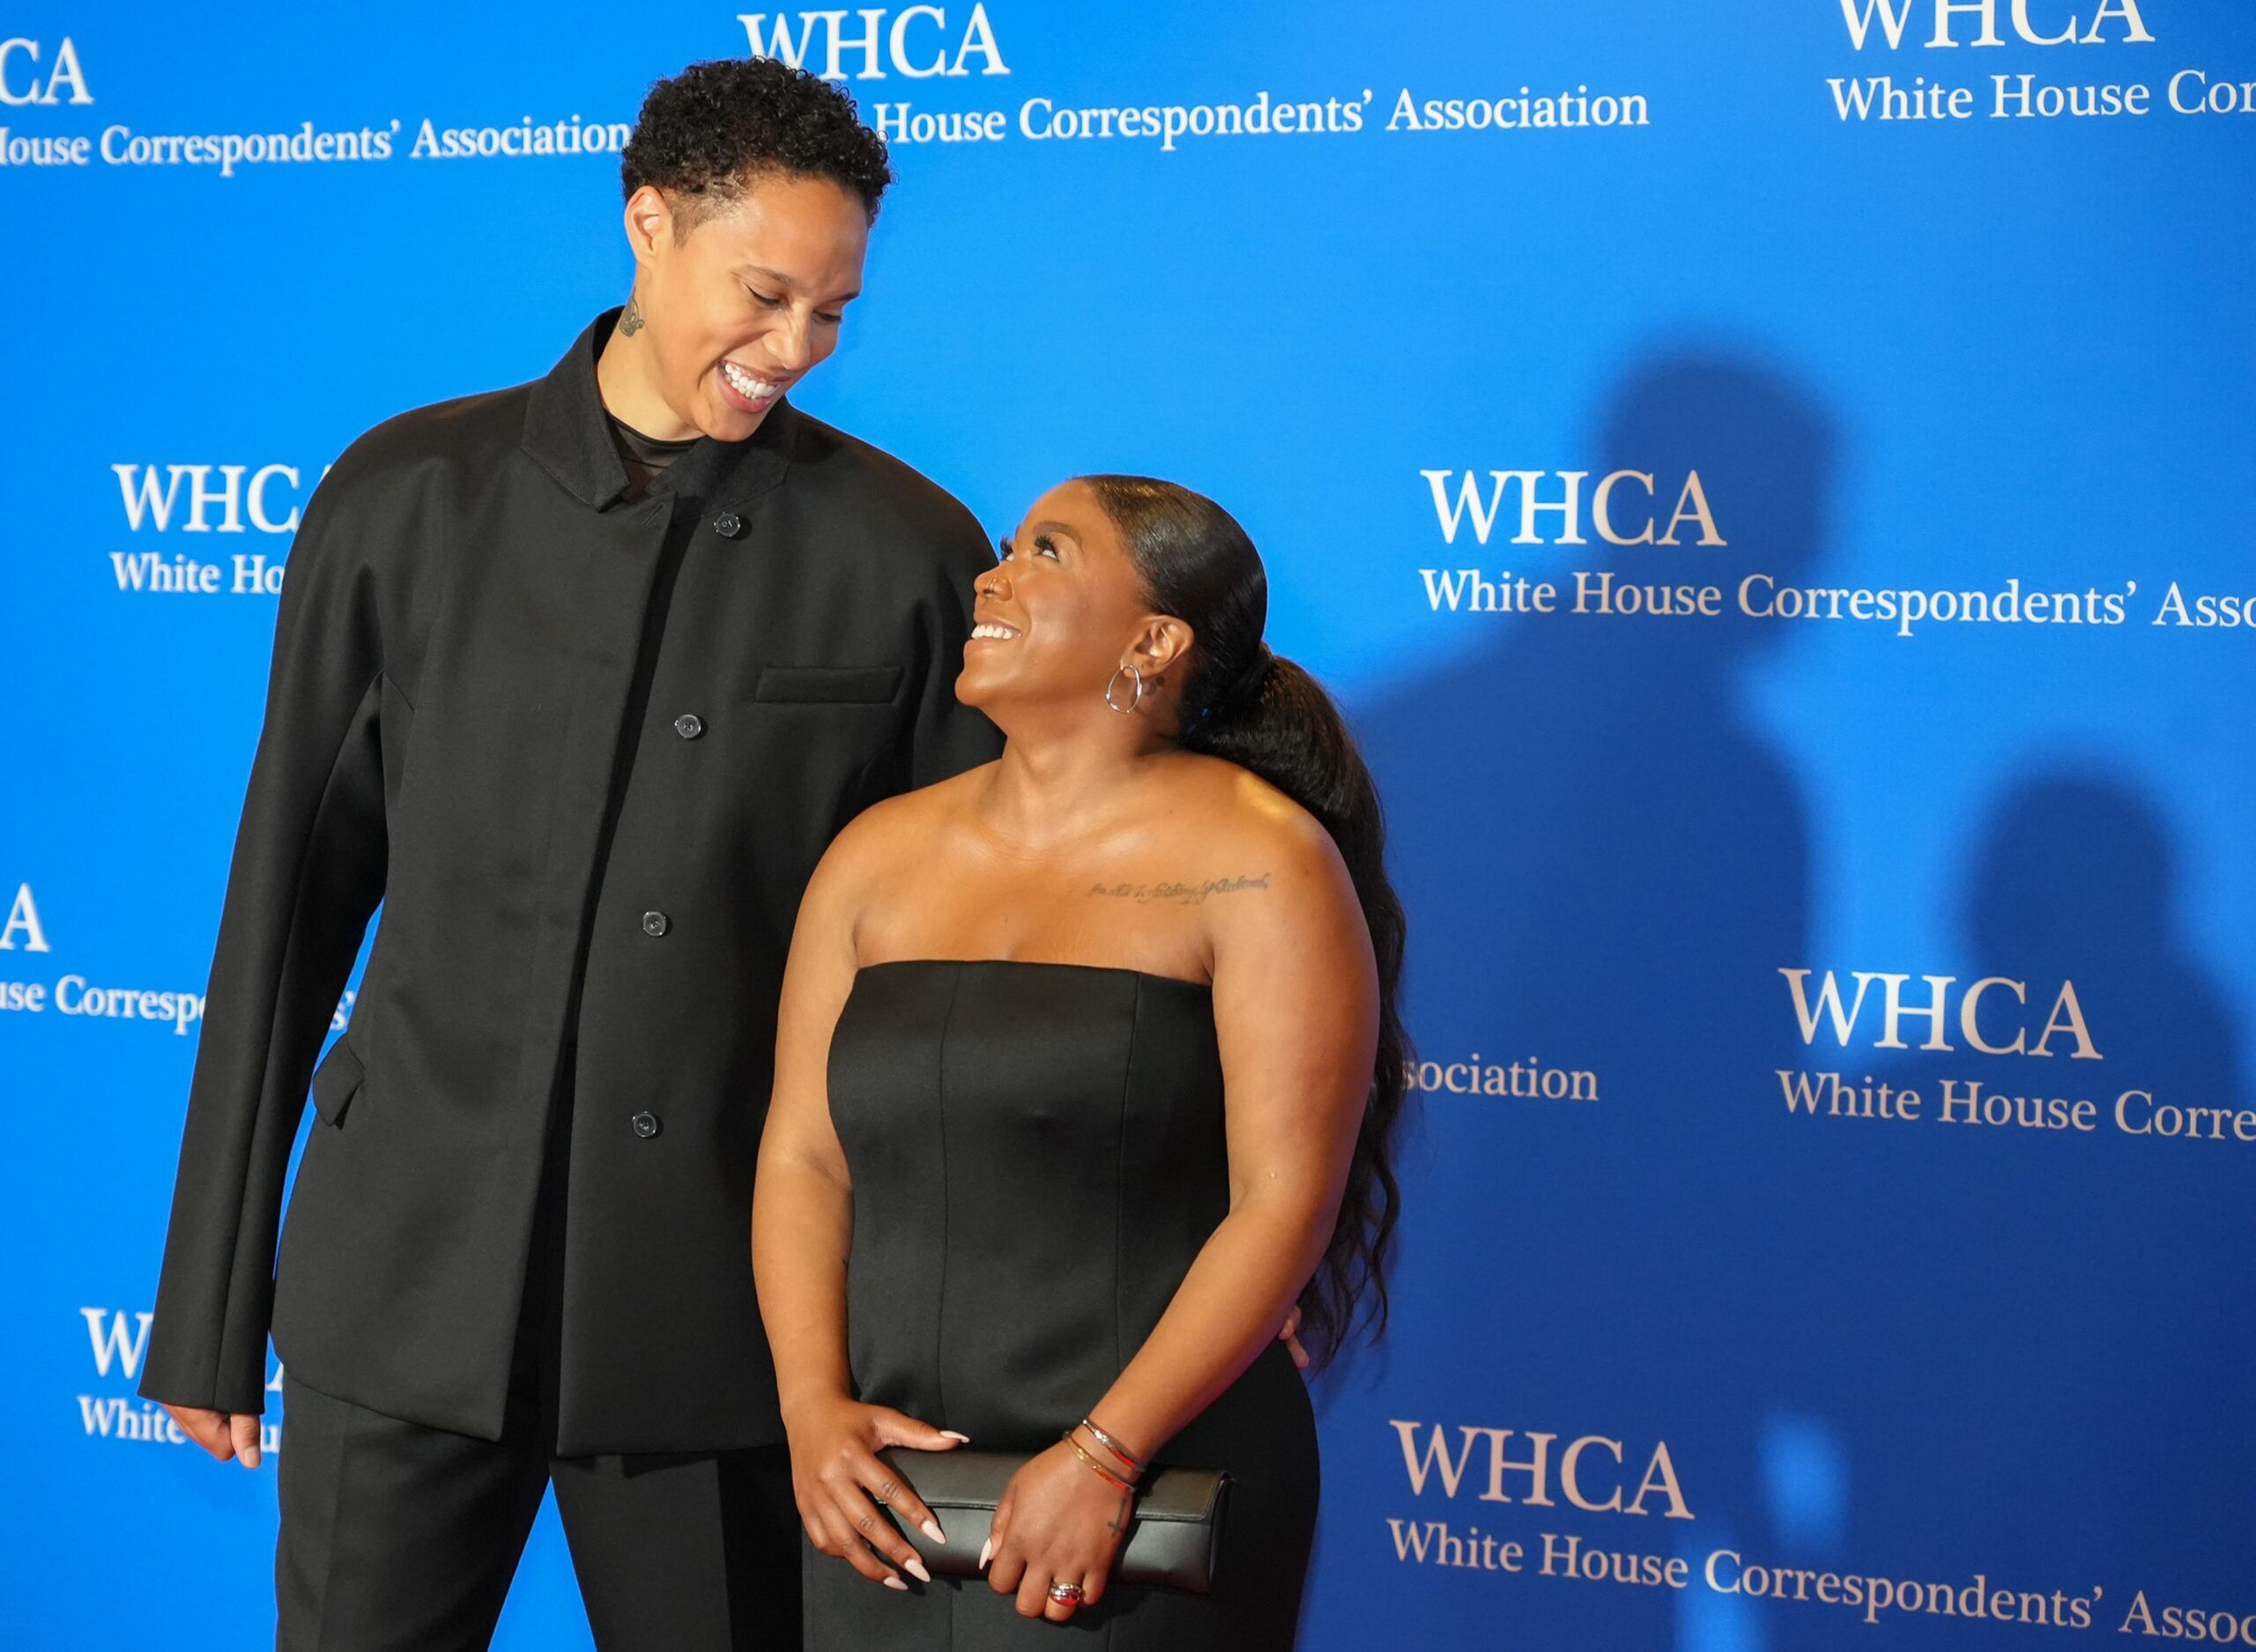 Apr 29, 2023; Washington, DC, USA; Brittney Griner and Cherelle Griner attend the White House Correspondents' Association dinner in Washington.. Mandatory Credit: Megan Smith-USA TODAY